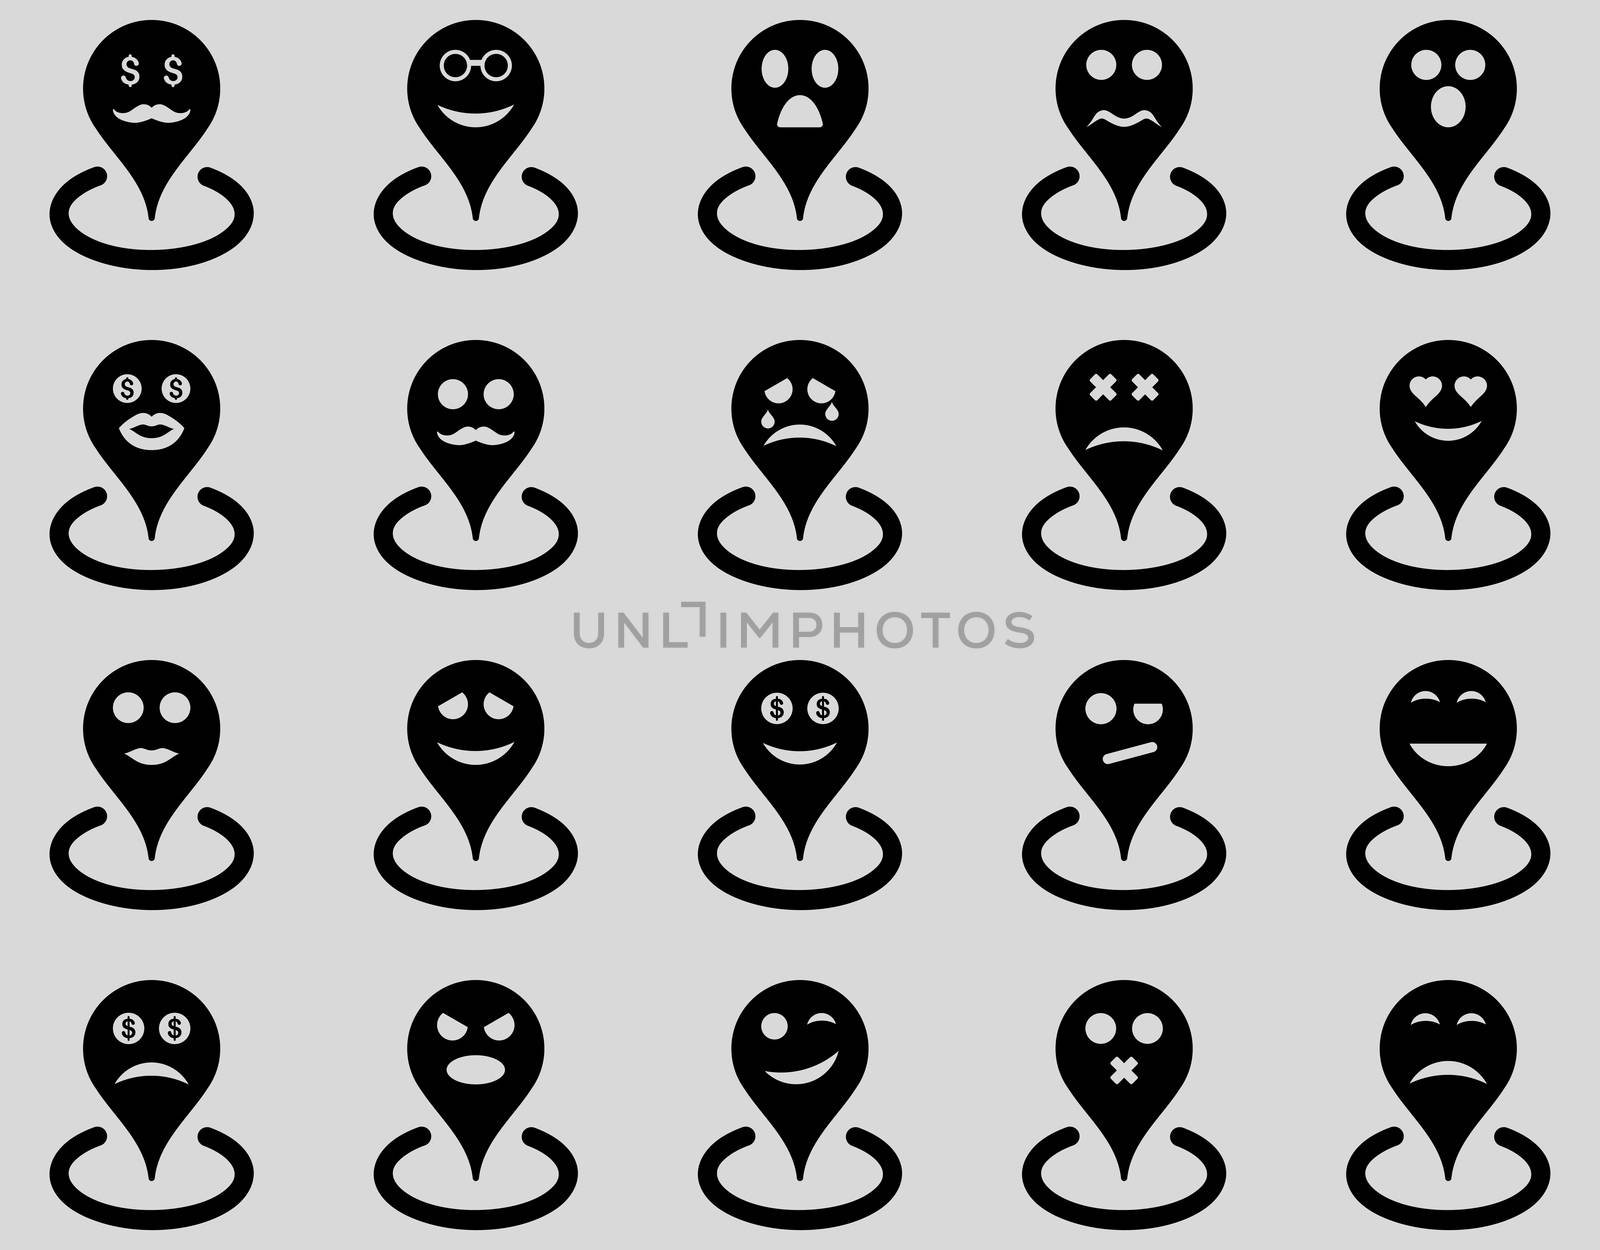 Smiled location icons. Glyph set style is flat images, black symbols, isolated on a light gray background.